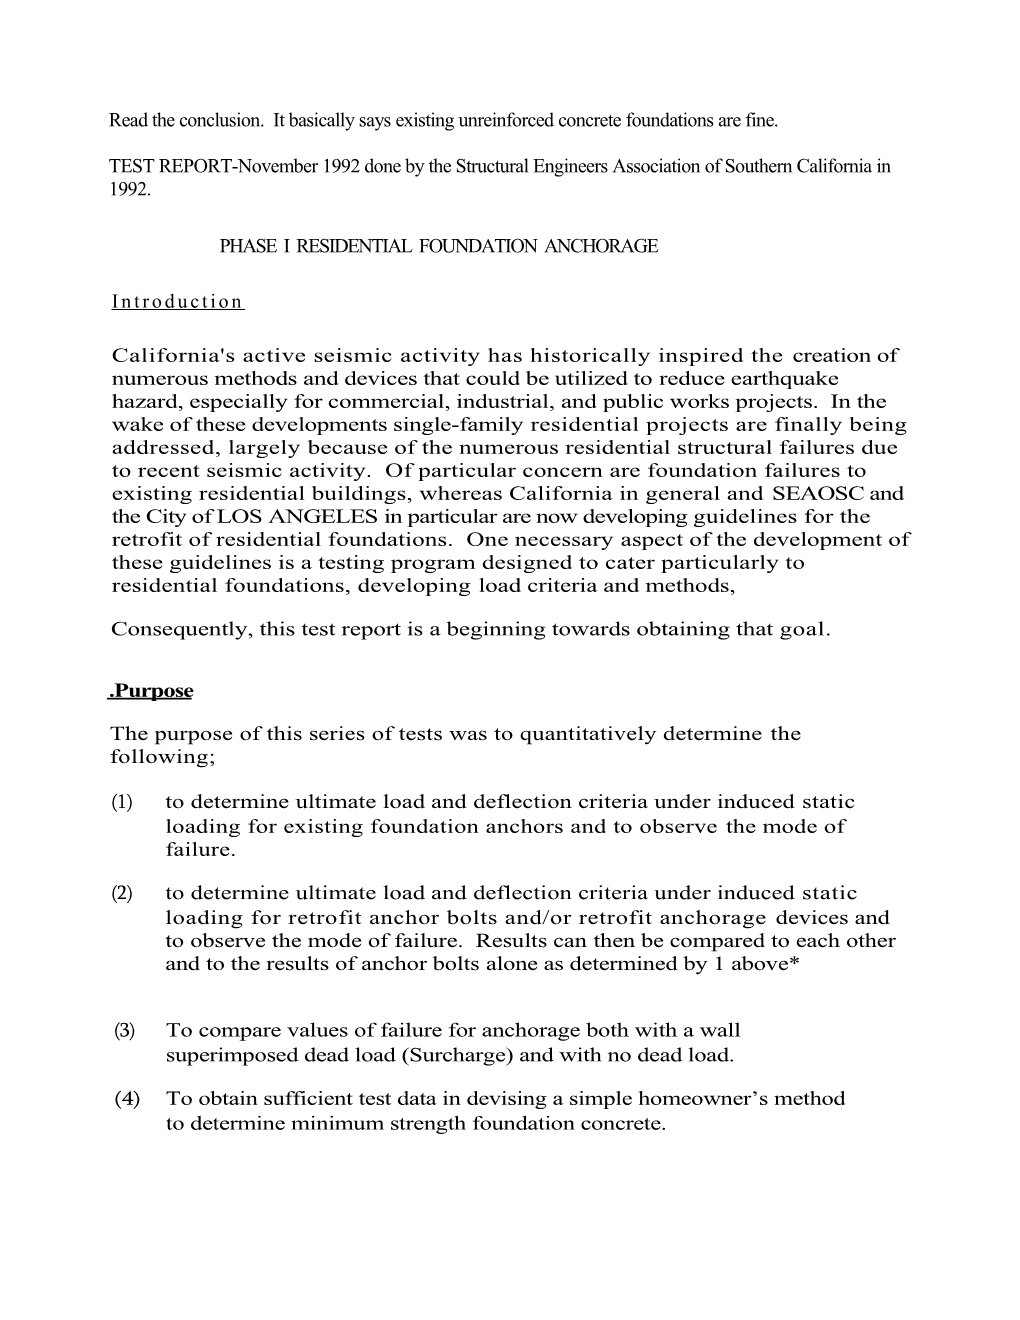 Read the Conclusion. It Basically Says Existing Unreinforced Concrete Foundations Are Fine